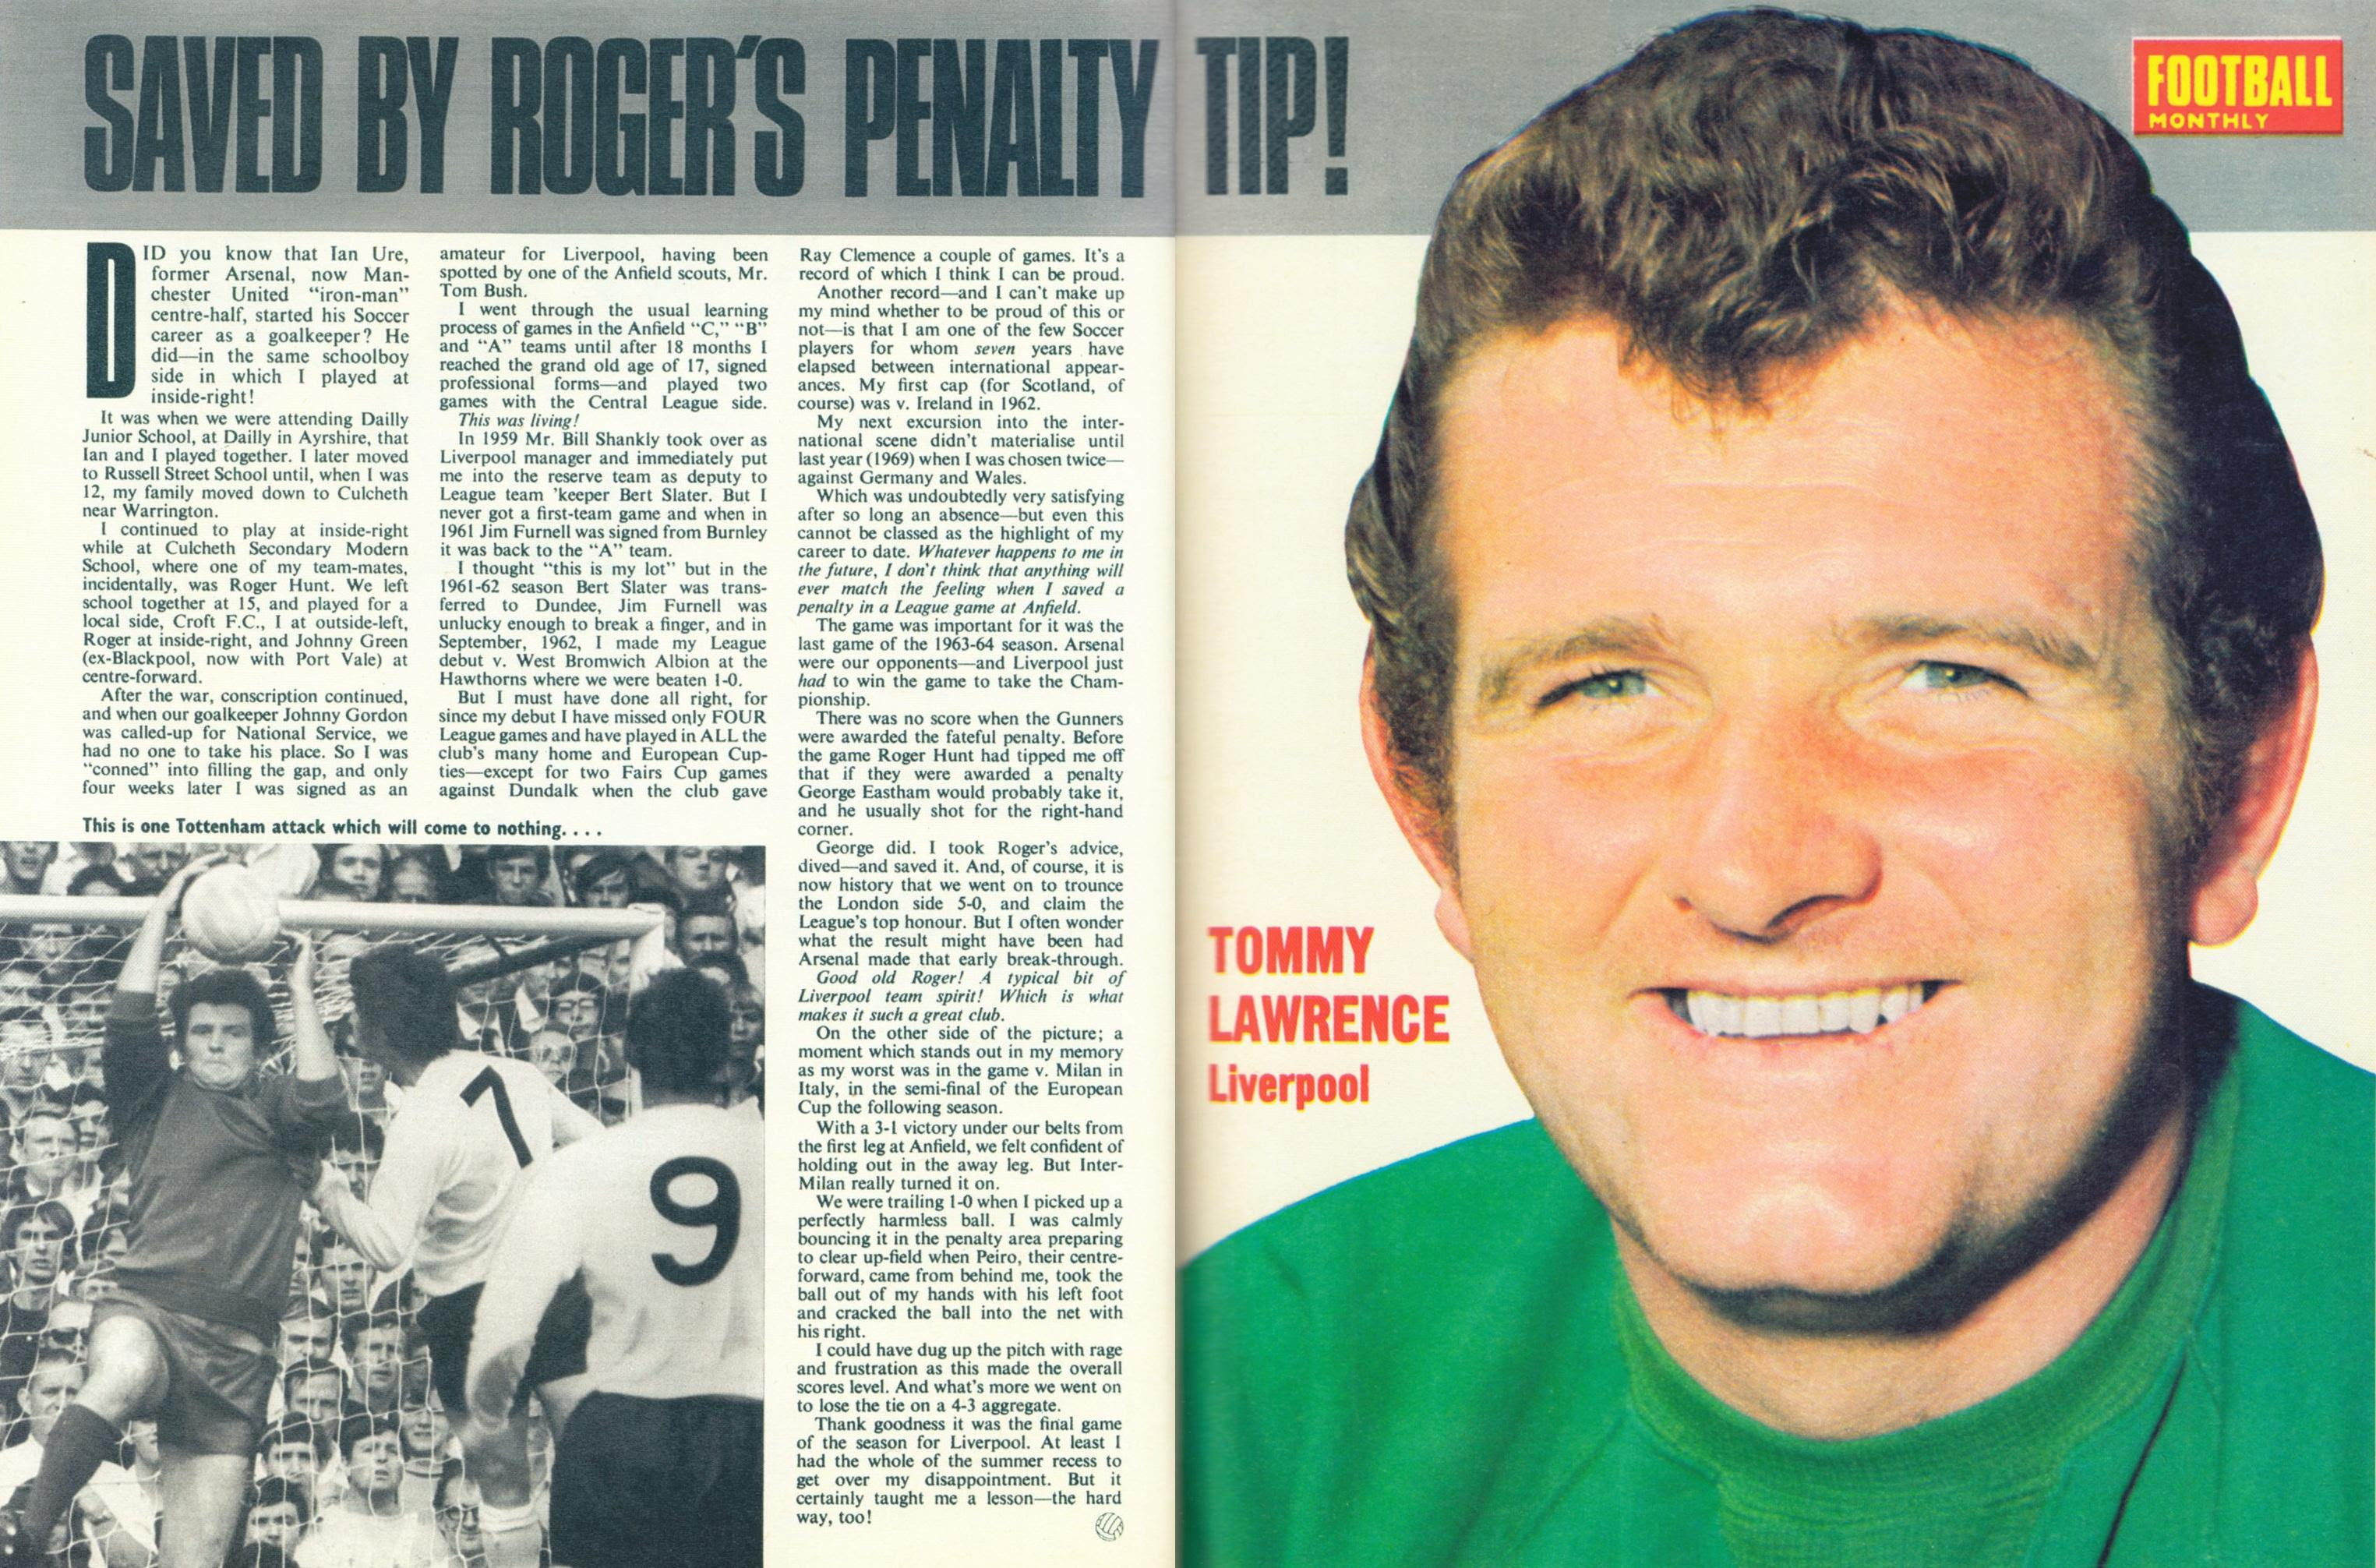 IMG TOMMY LAWRENCE, Footballer